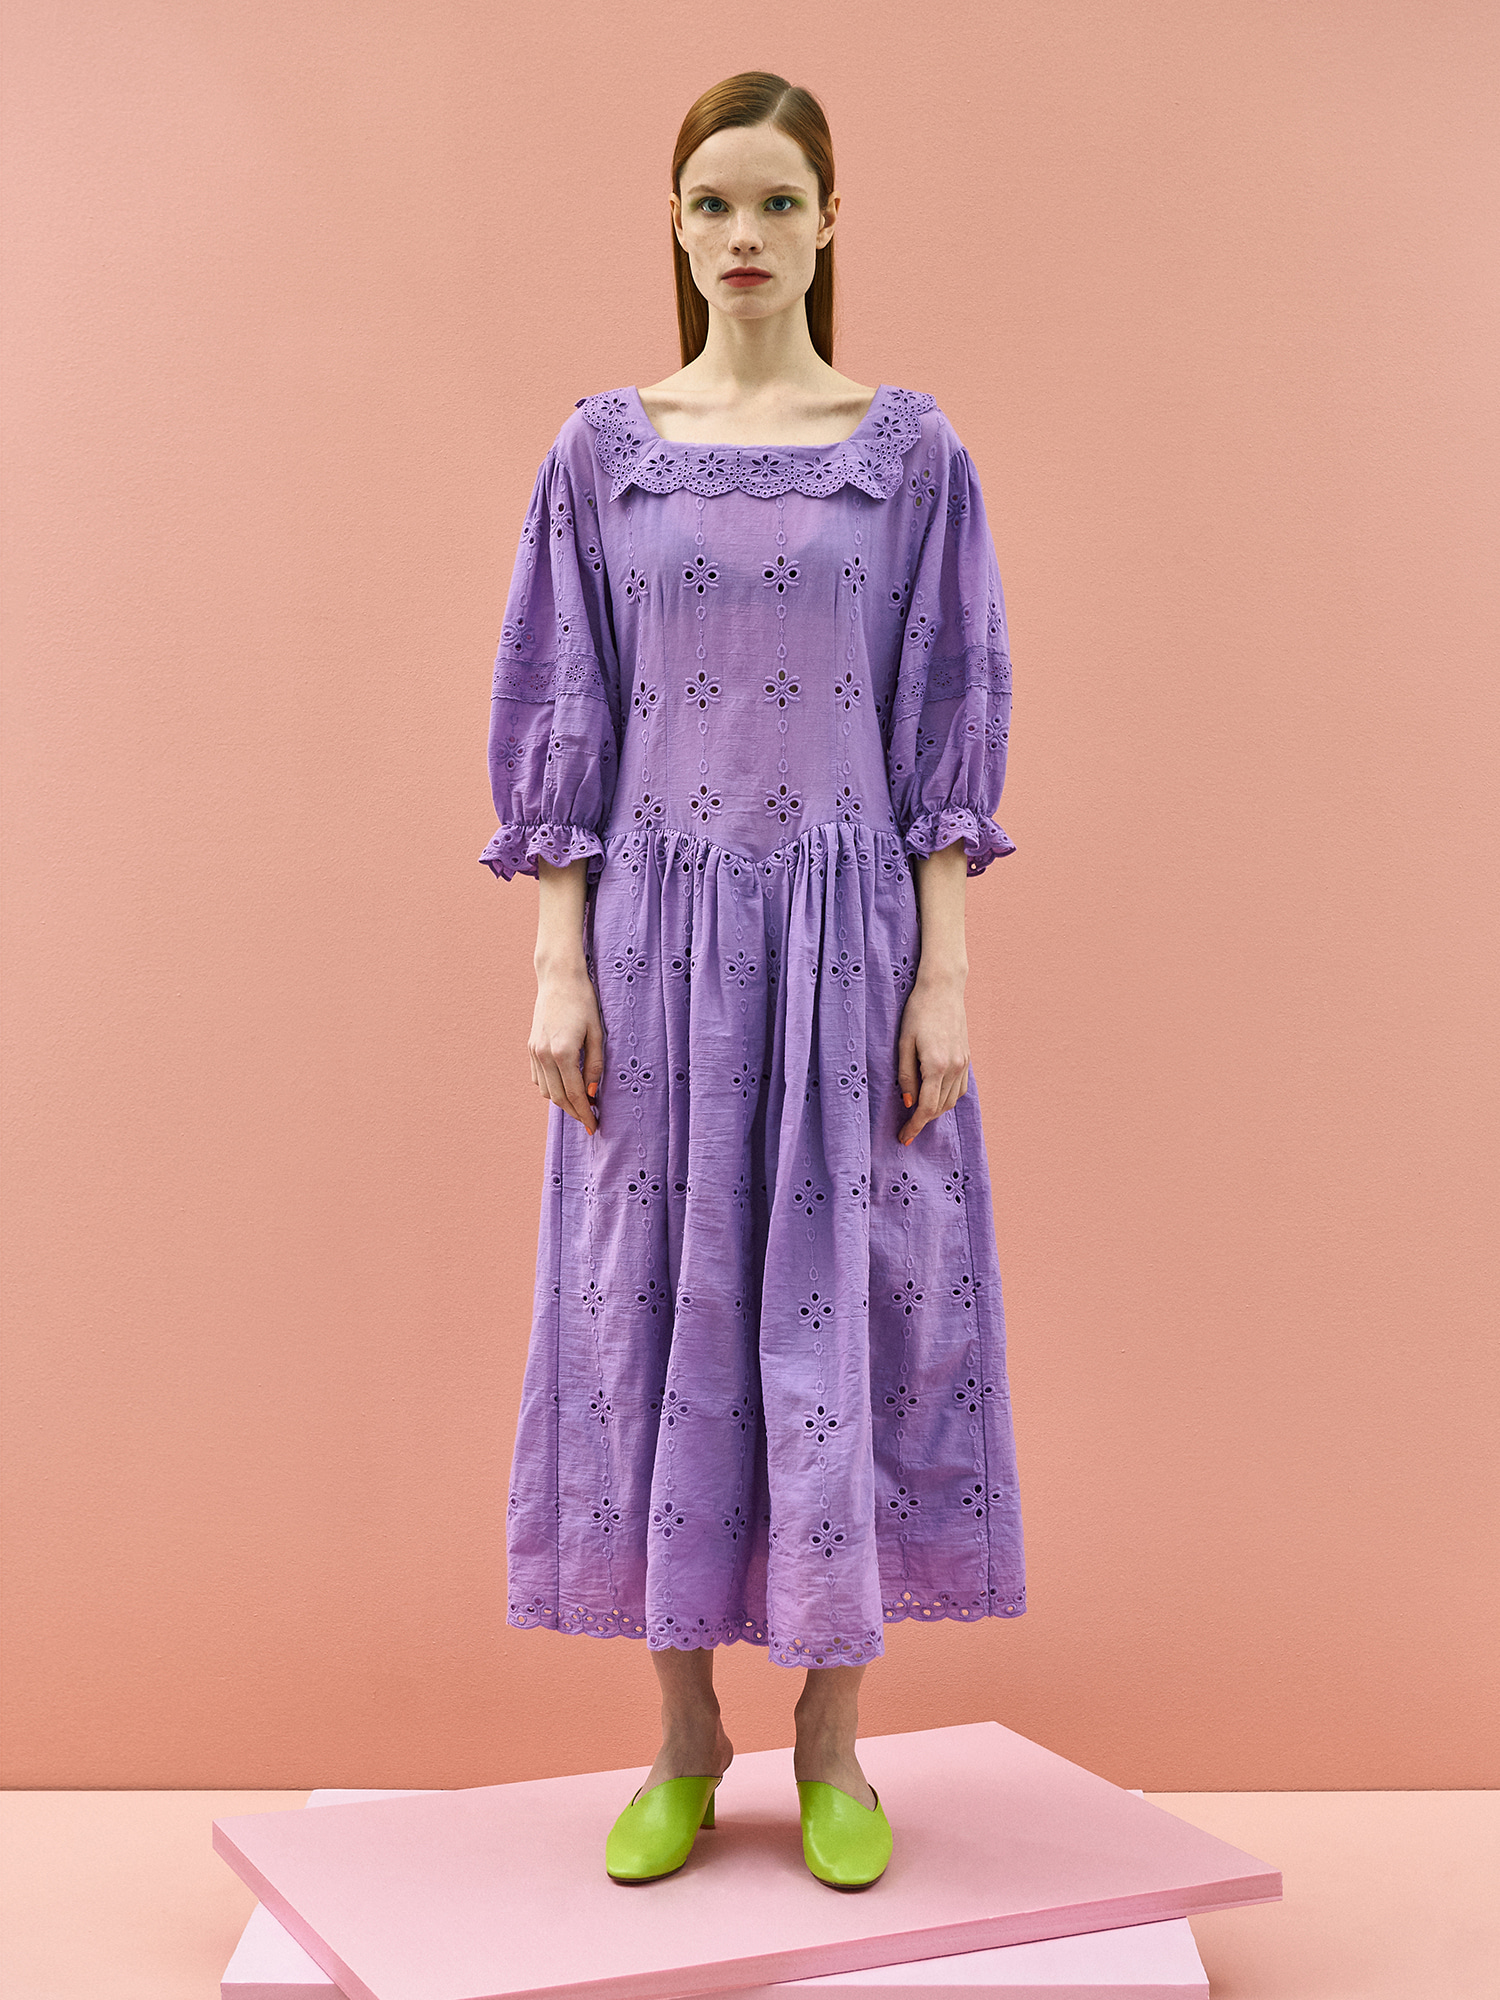 Girlish Lace Cotton Dress in Purple